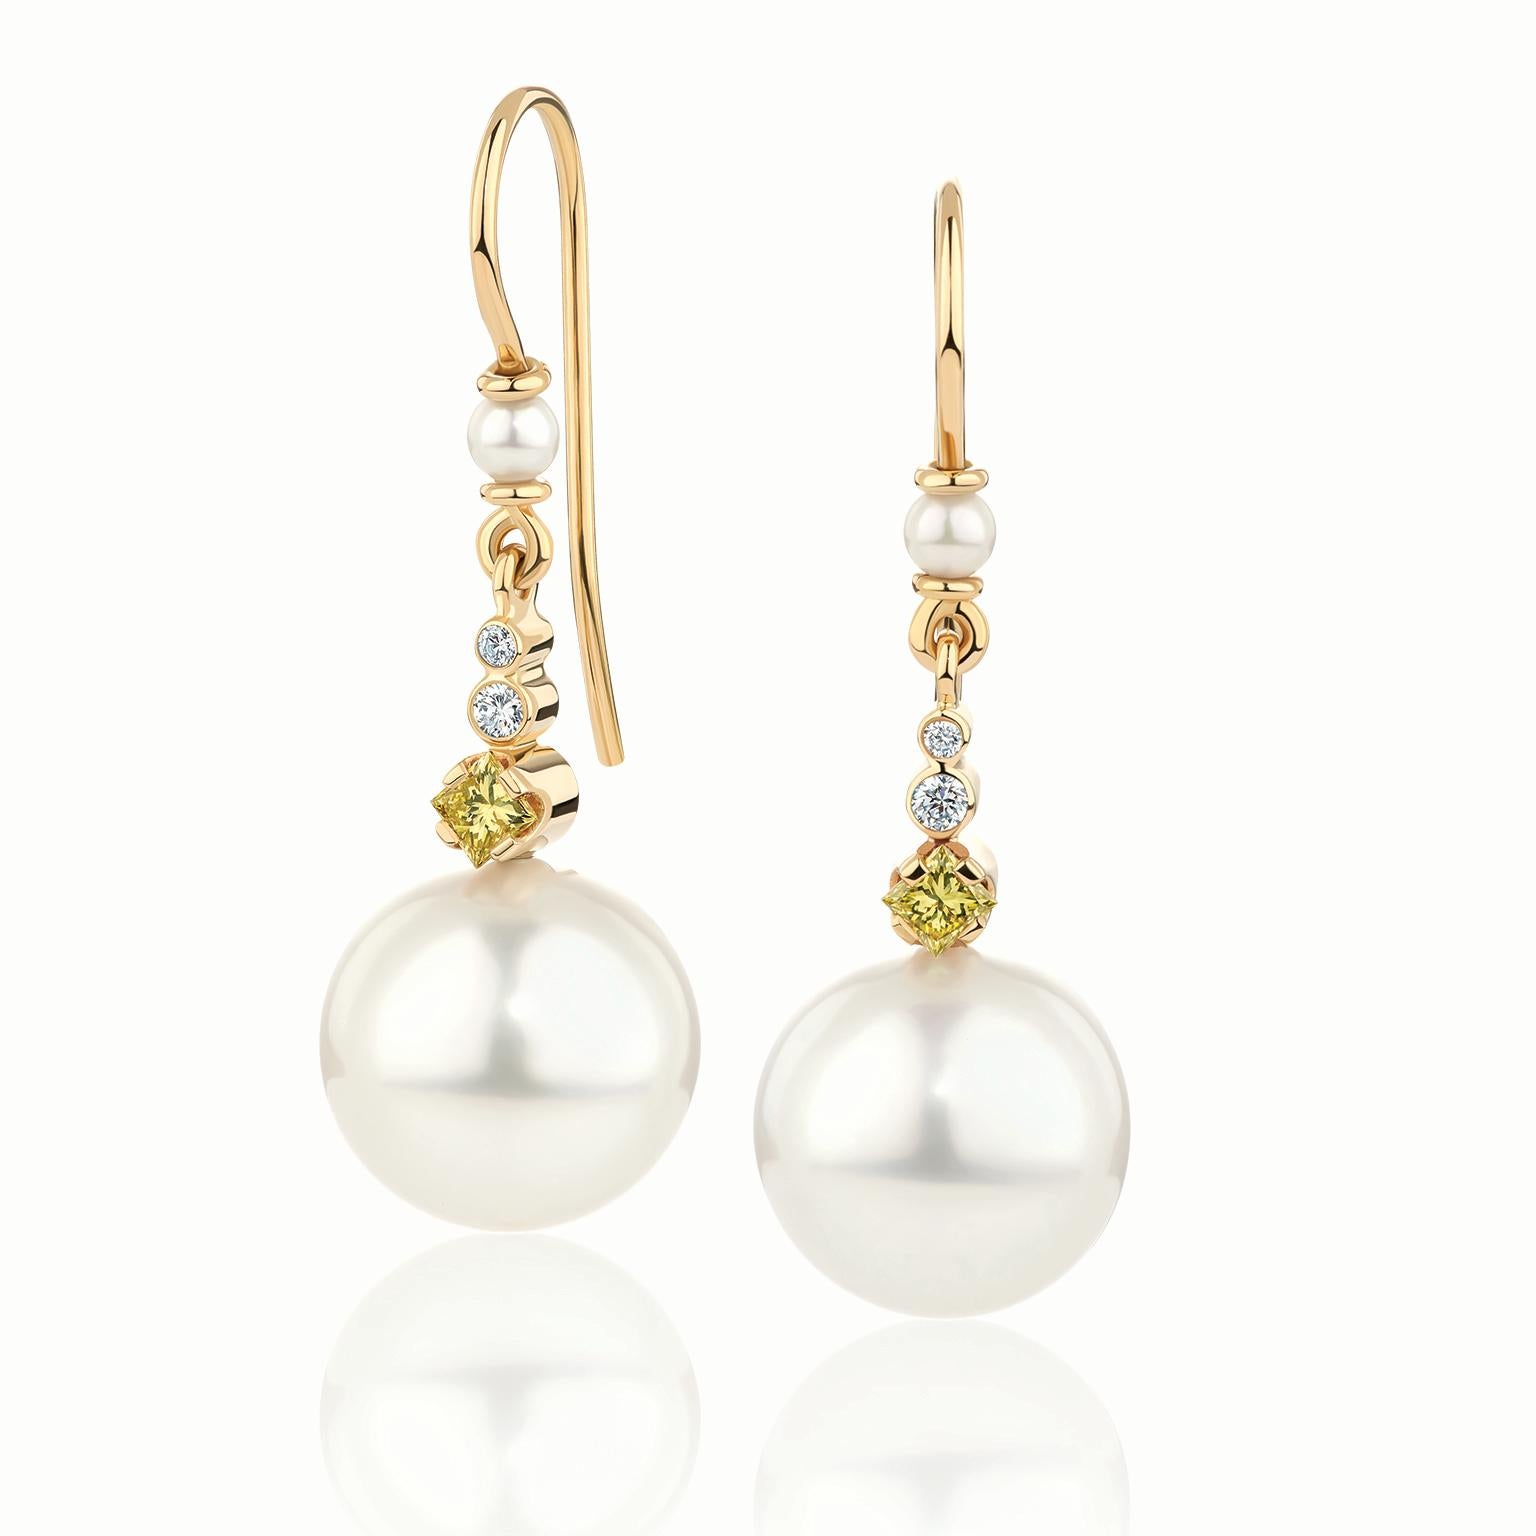 Paul Amey’s South Sea pearl and diamond earrings were crafted from 18K yellow gold with hand crafted shepherd's crook fittings.  

At the top of the earring is the 3mm cultured South Sea pearl which is followed by a “loop” pivot. This leads to a 1pt